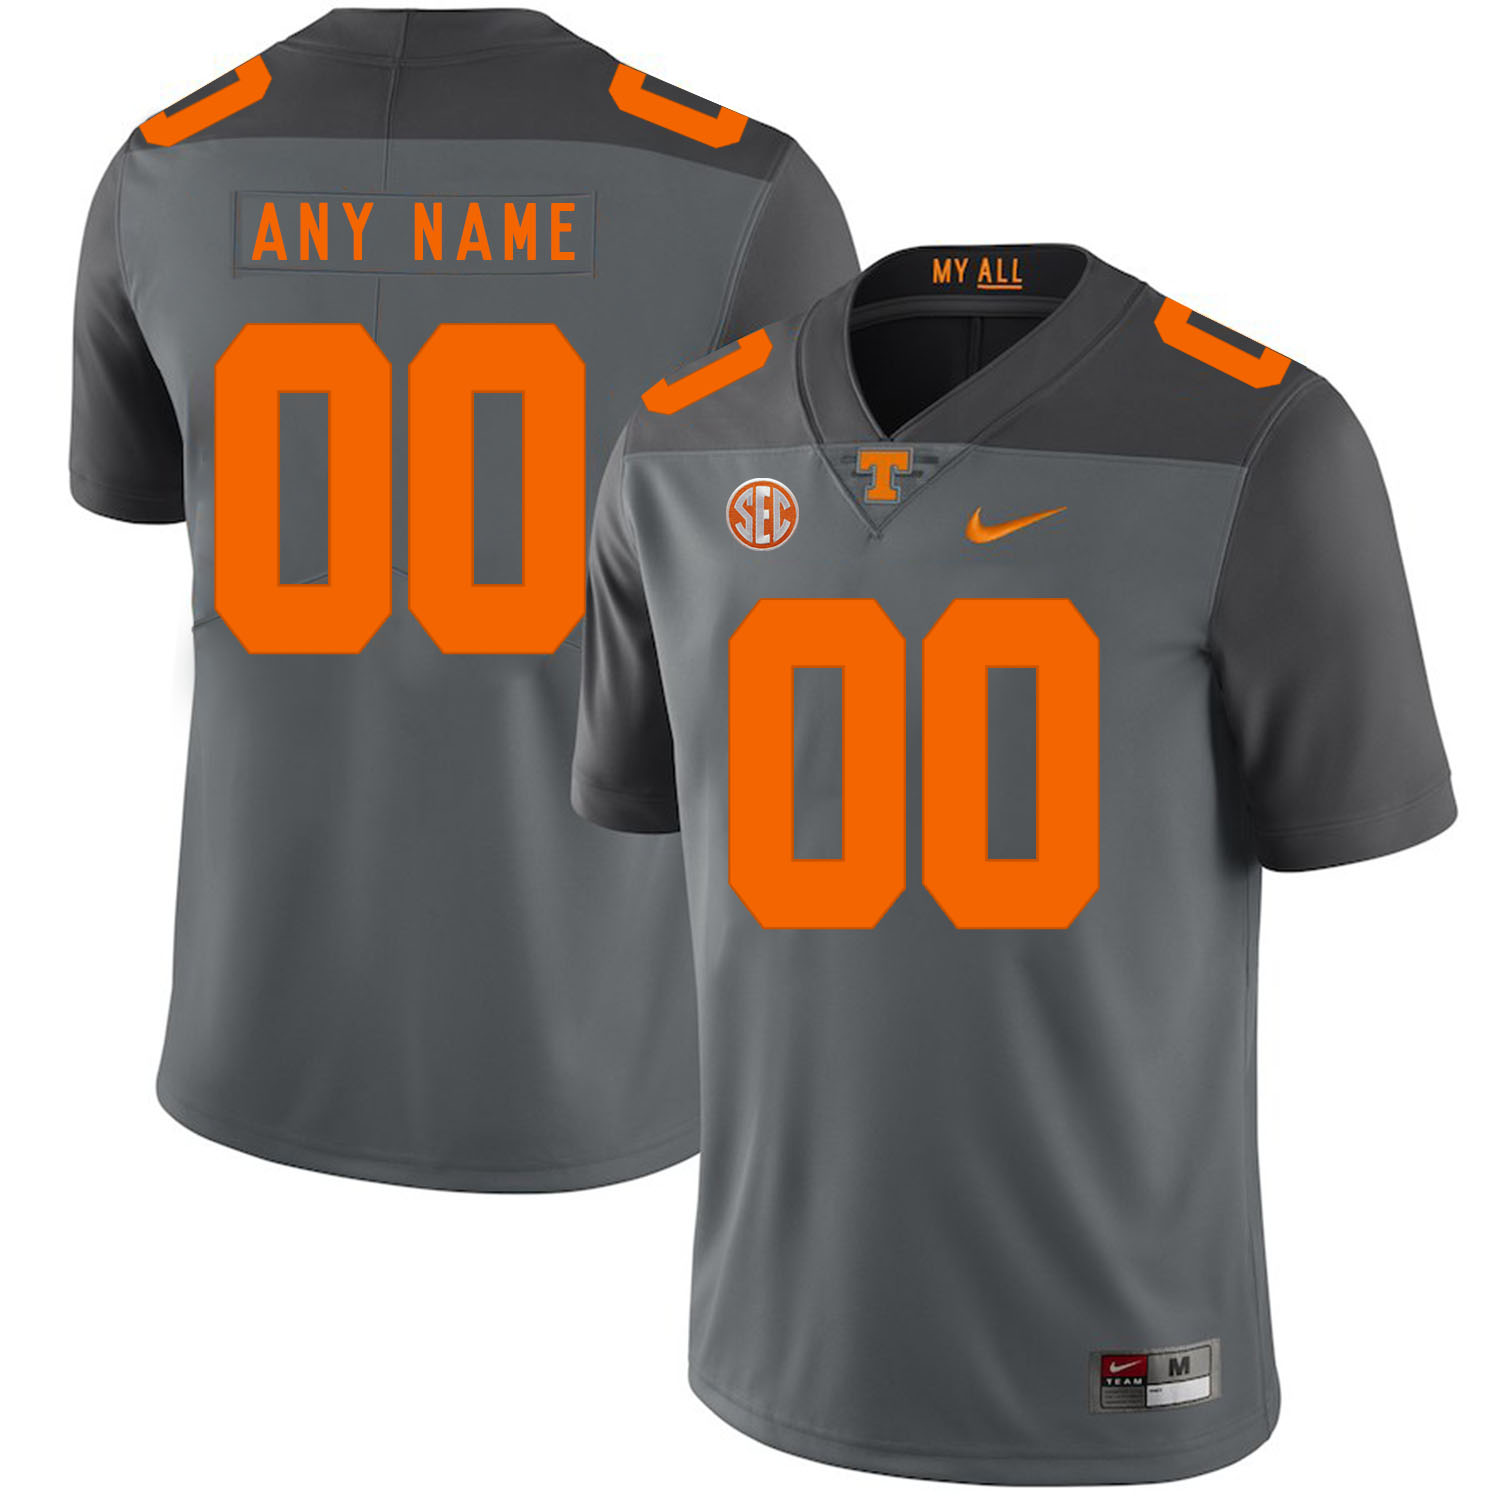 Tennessee Volunteers Gray Men's Customized Nike College Football Jersey